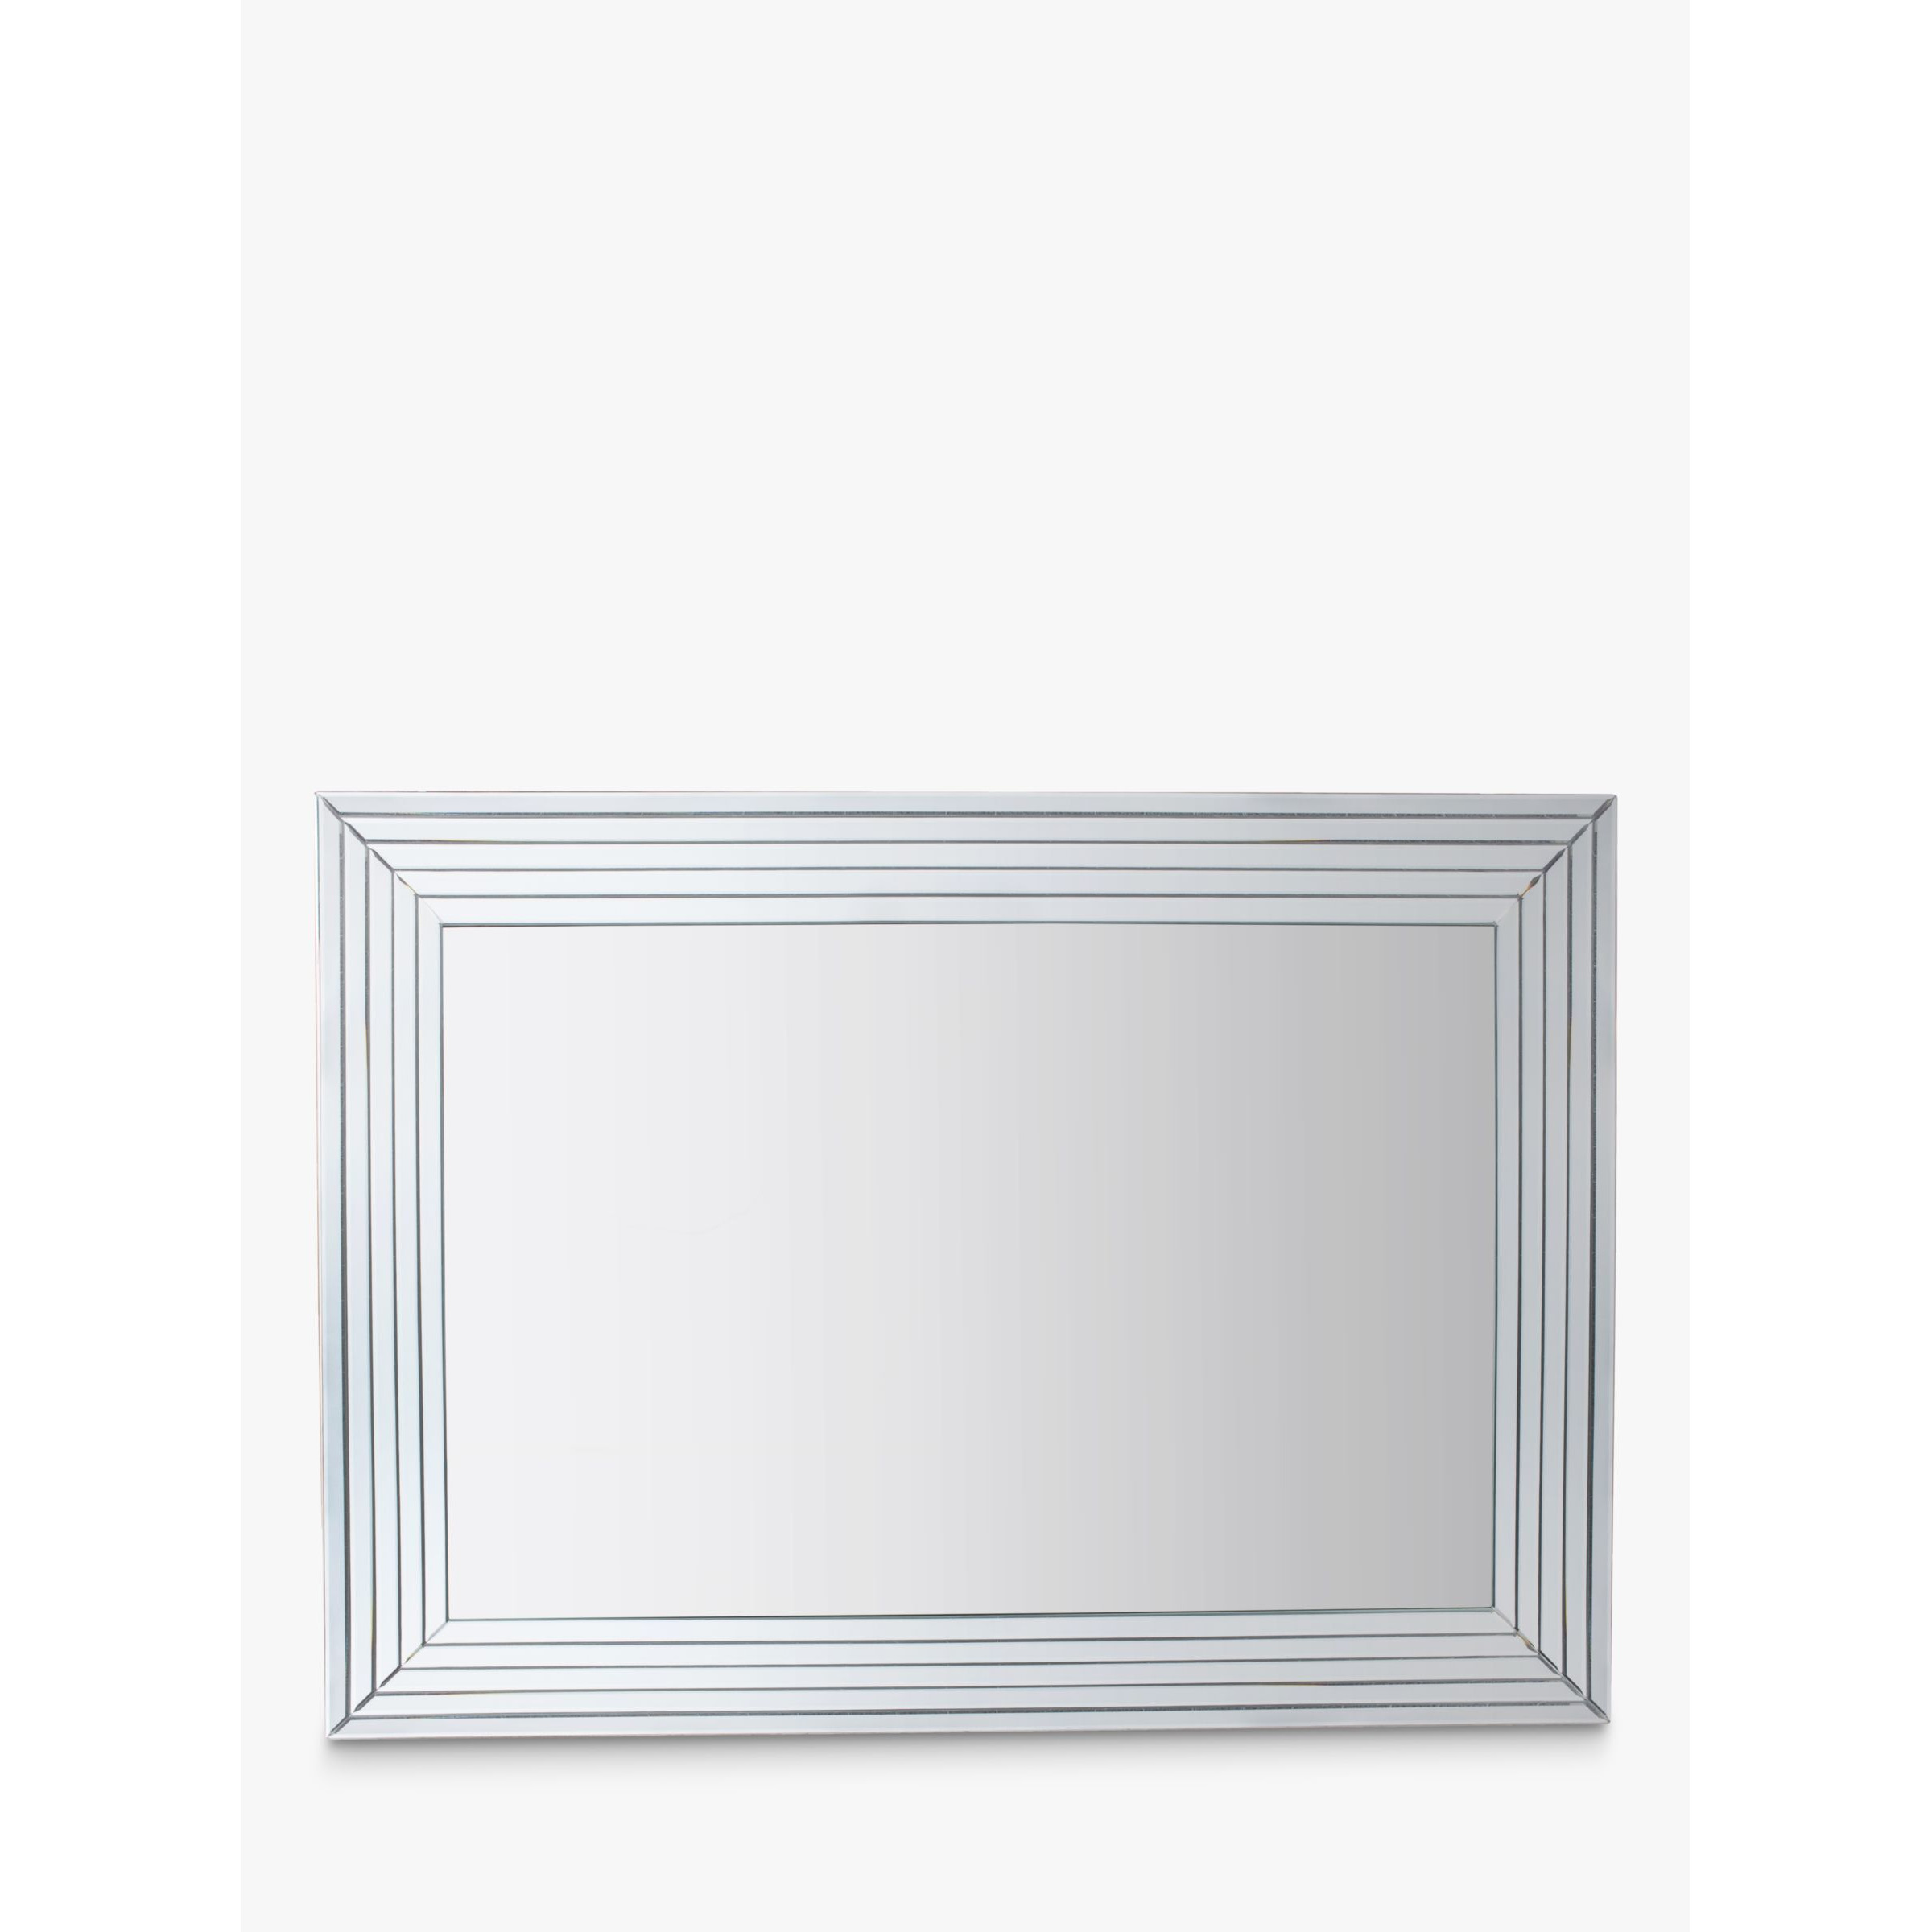 Gallery Direct Brillot Rectangular Wall Mirror, 115 x 85cm, Silver - image 1